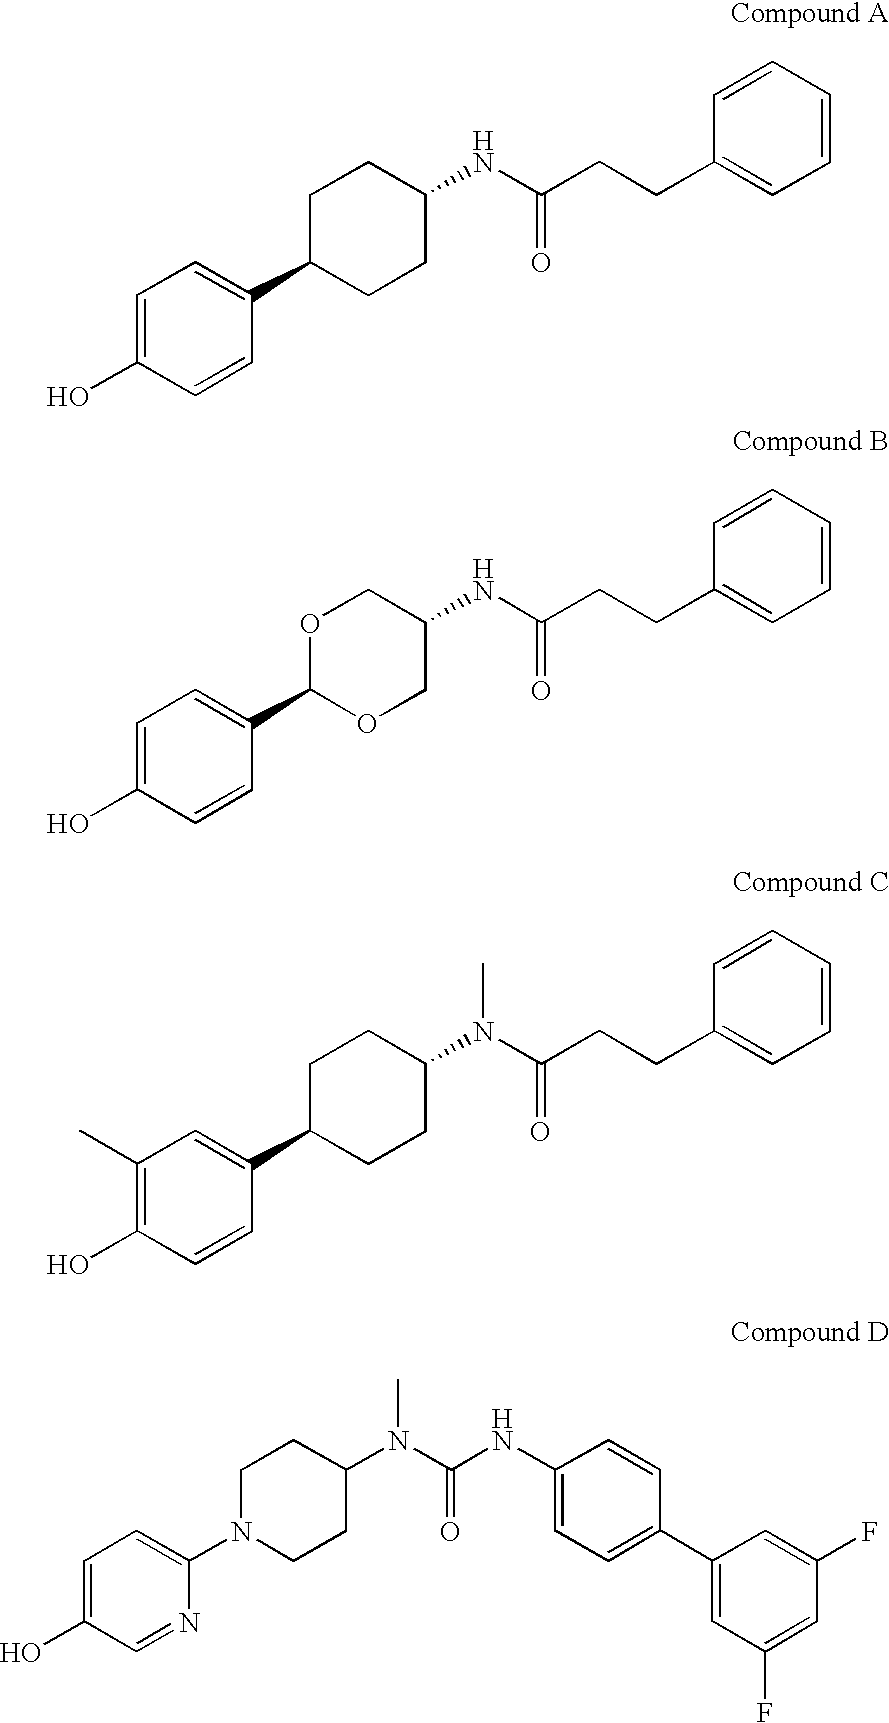 Cycloalkylene amide compounds as NR2B receptor antagonists